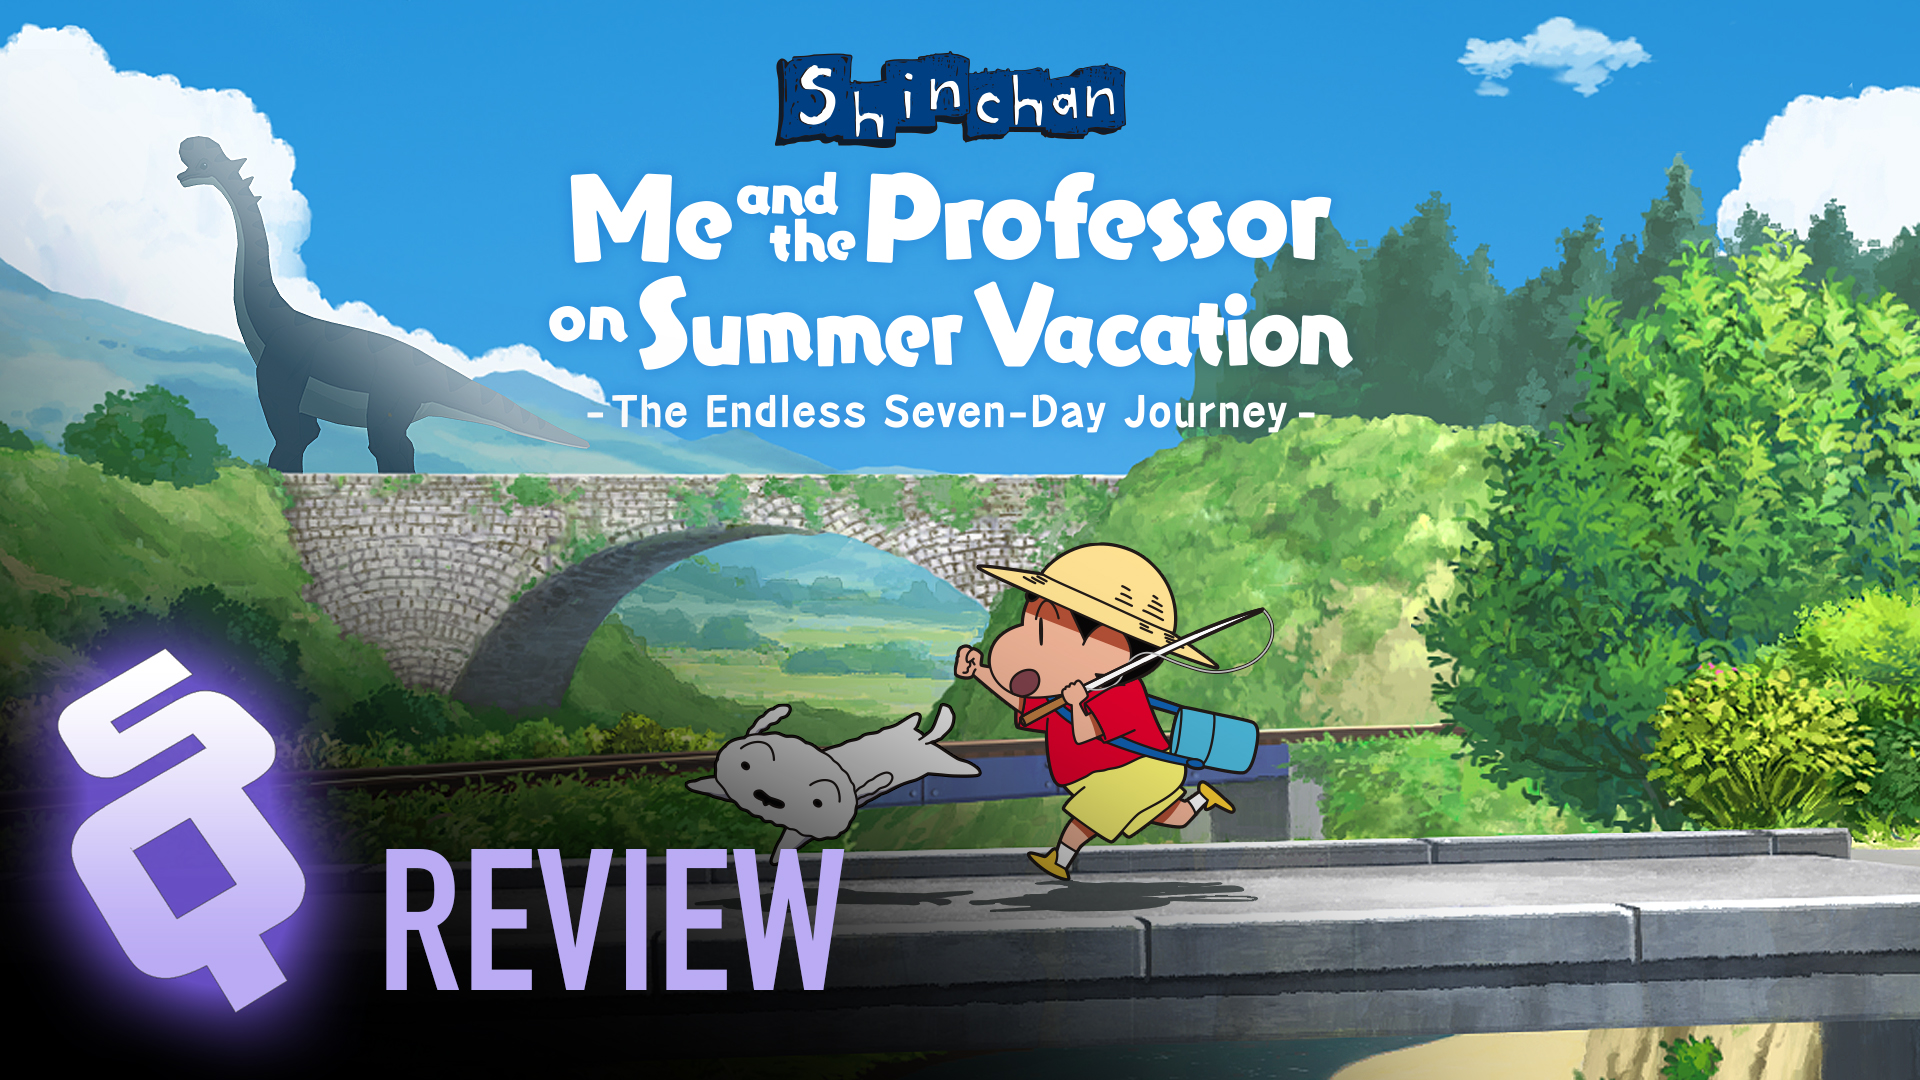 Shin chan: Me and the Professor on Summer Vacation Review